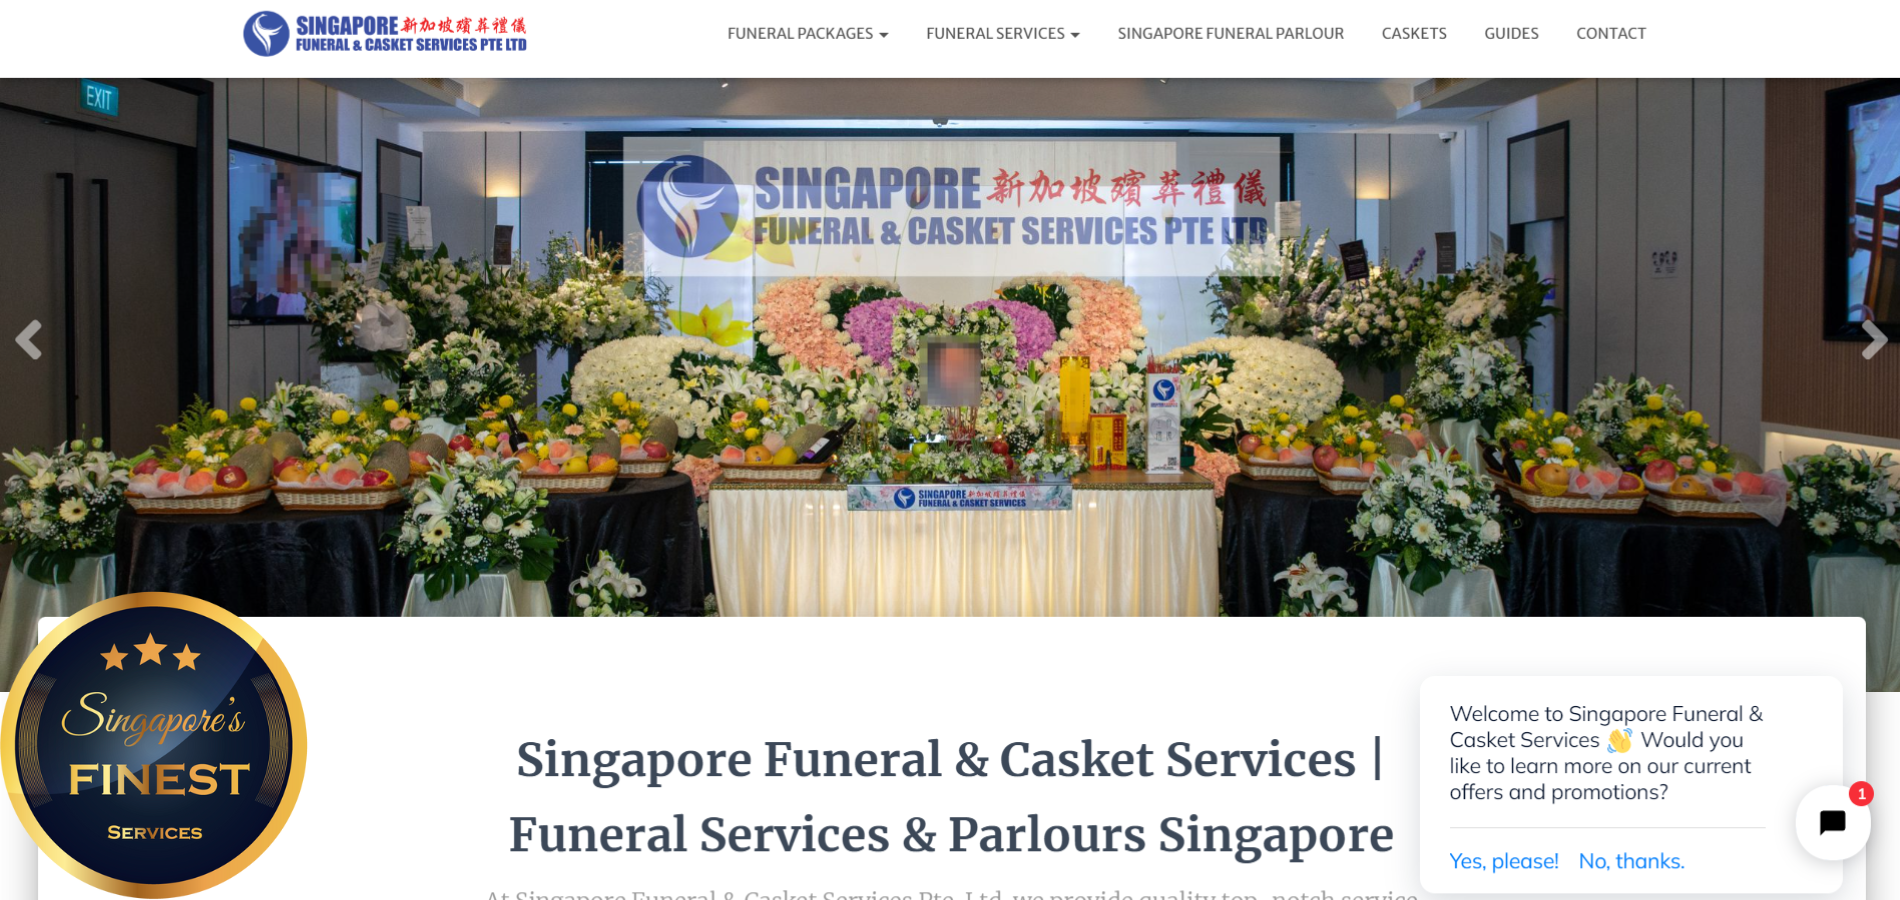 The Finest Funeral Services in Singapore